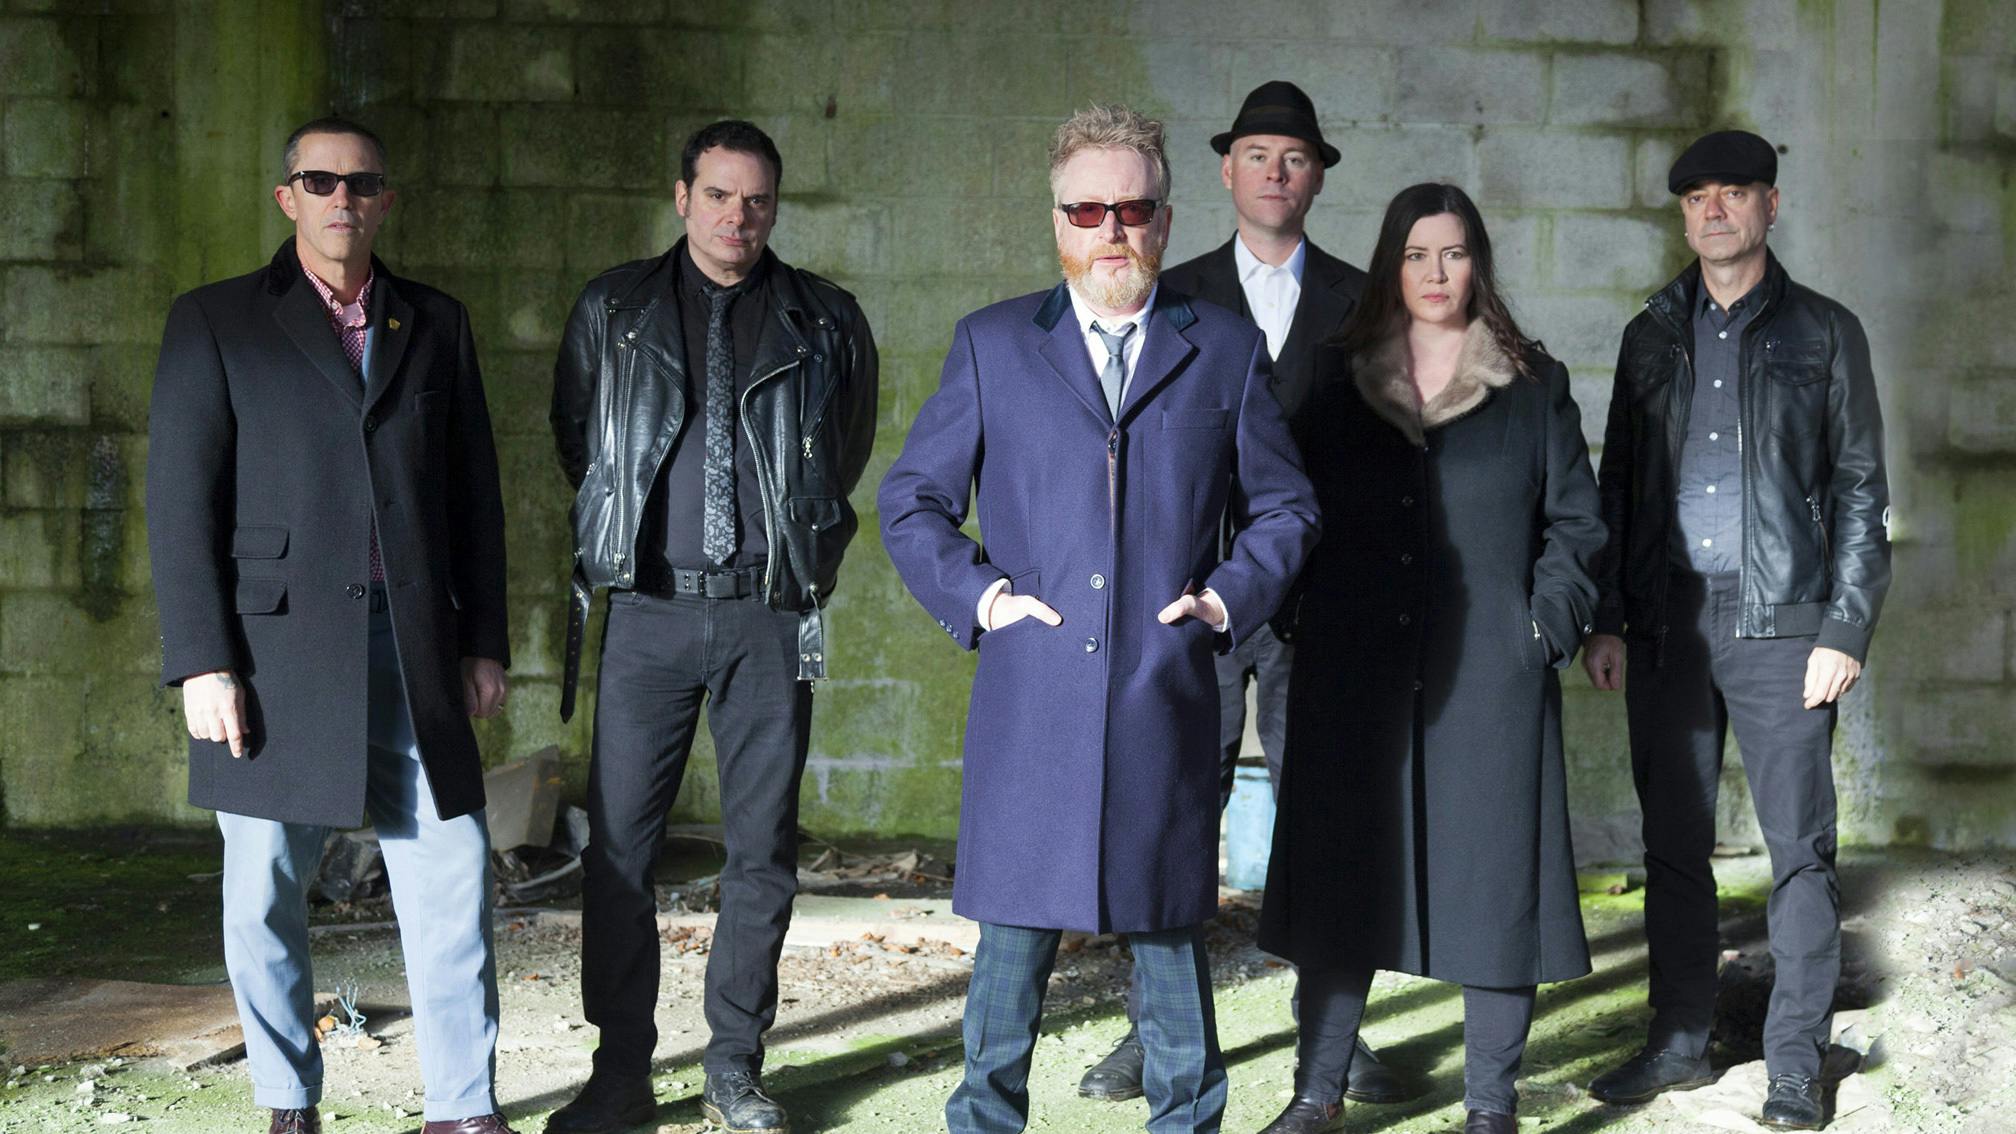 Flogging Molly albums ranked from worst to best by Dave King